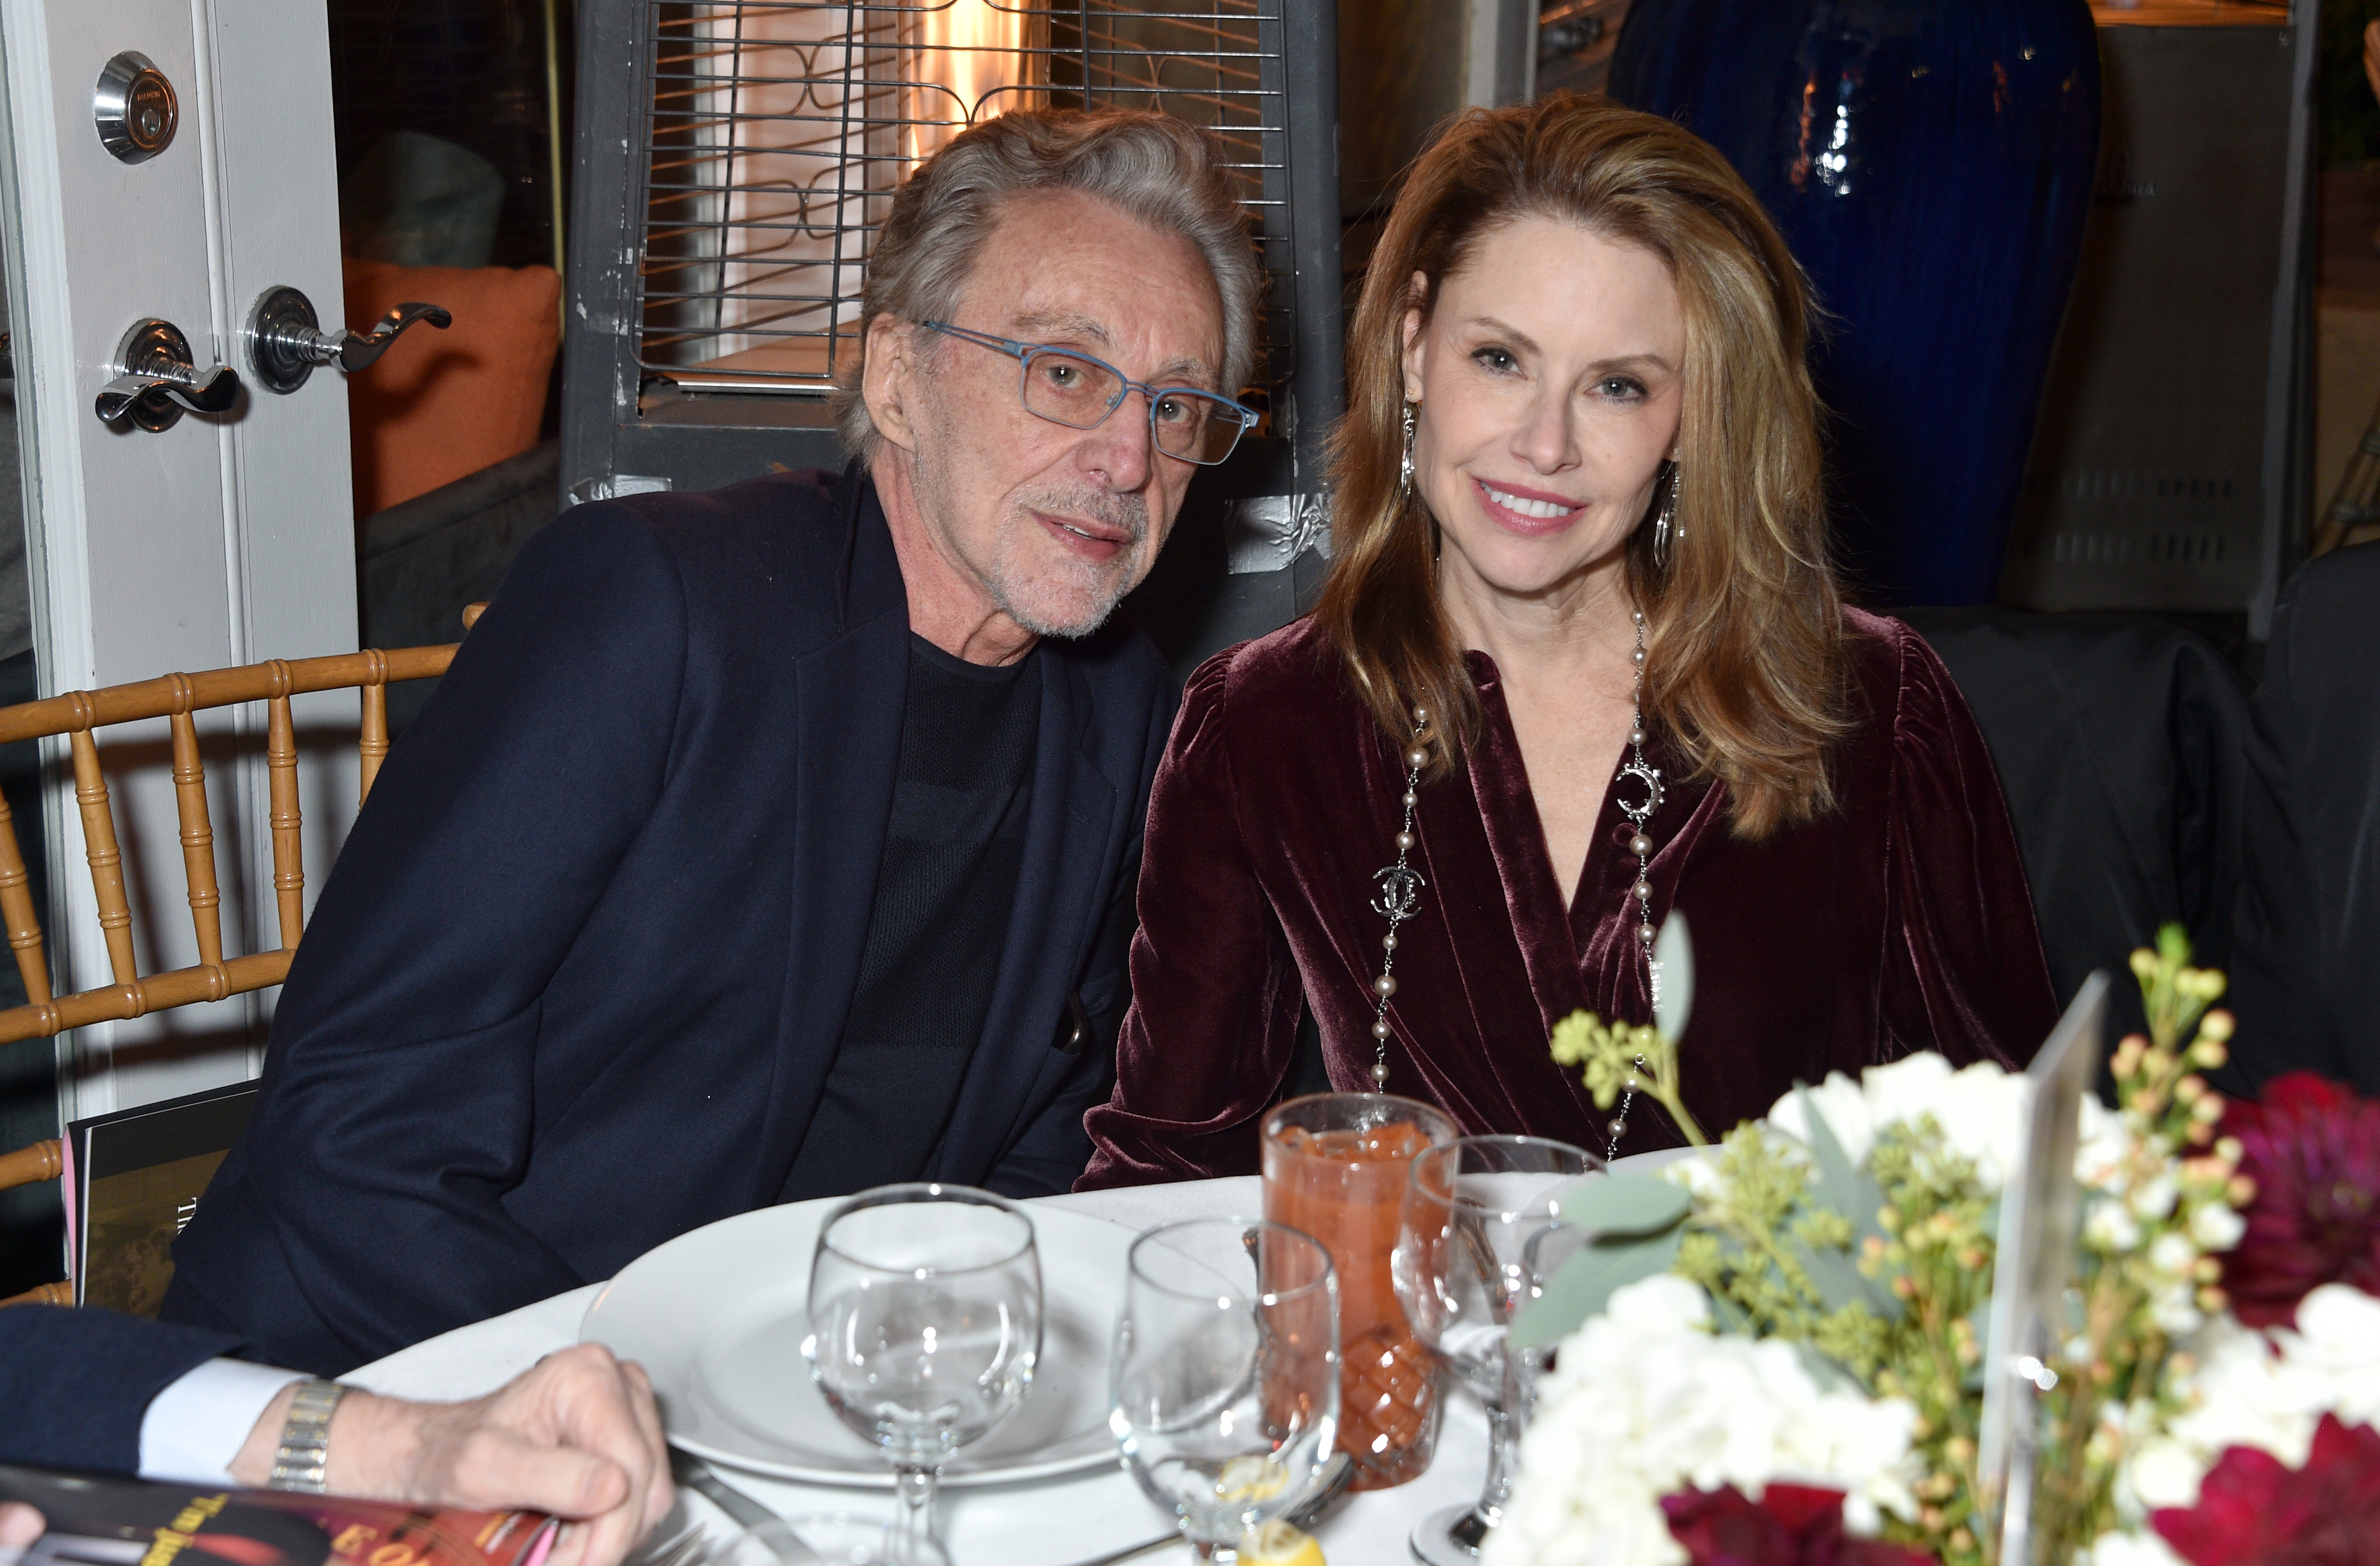 Frankie Valli and Jackie Jacobs at the Friars Club to honor Larry King for his 86th birthday on November 25, 2019, in Beverly Hills, California | Source: Getty Images